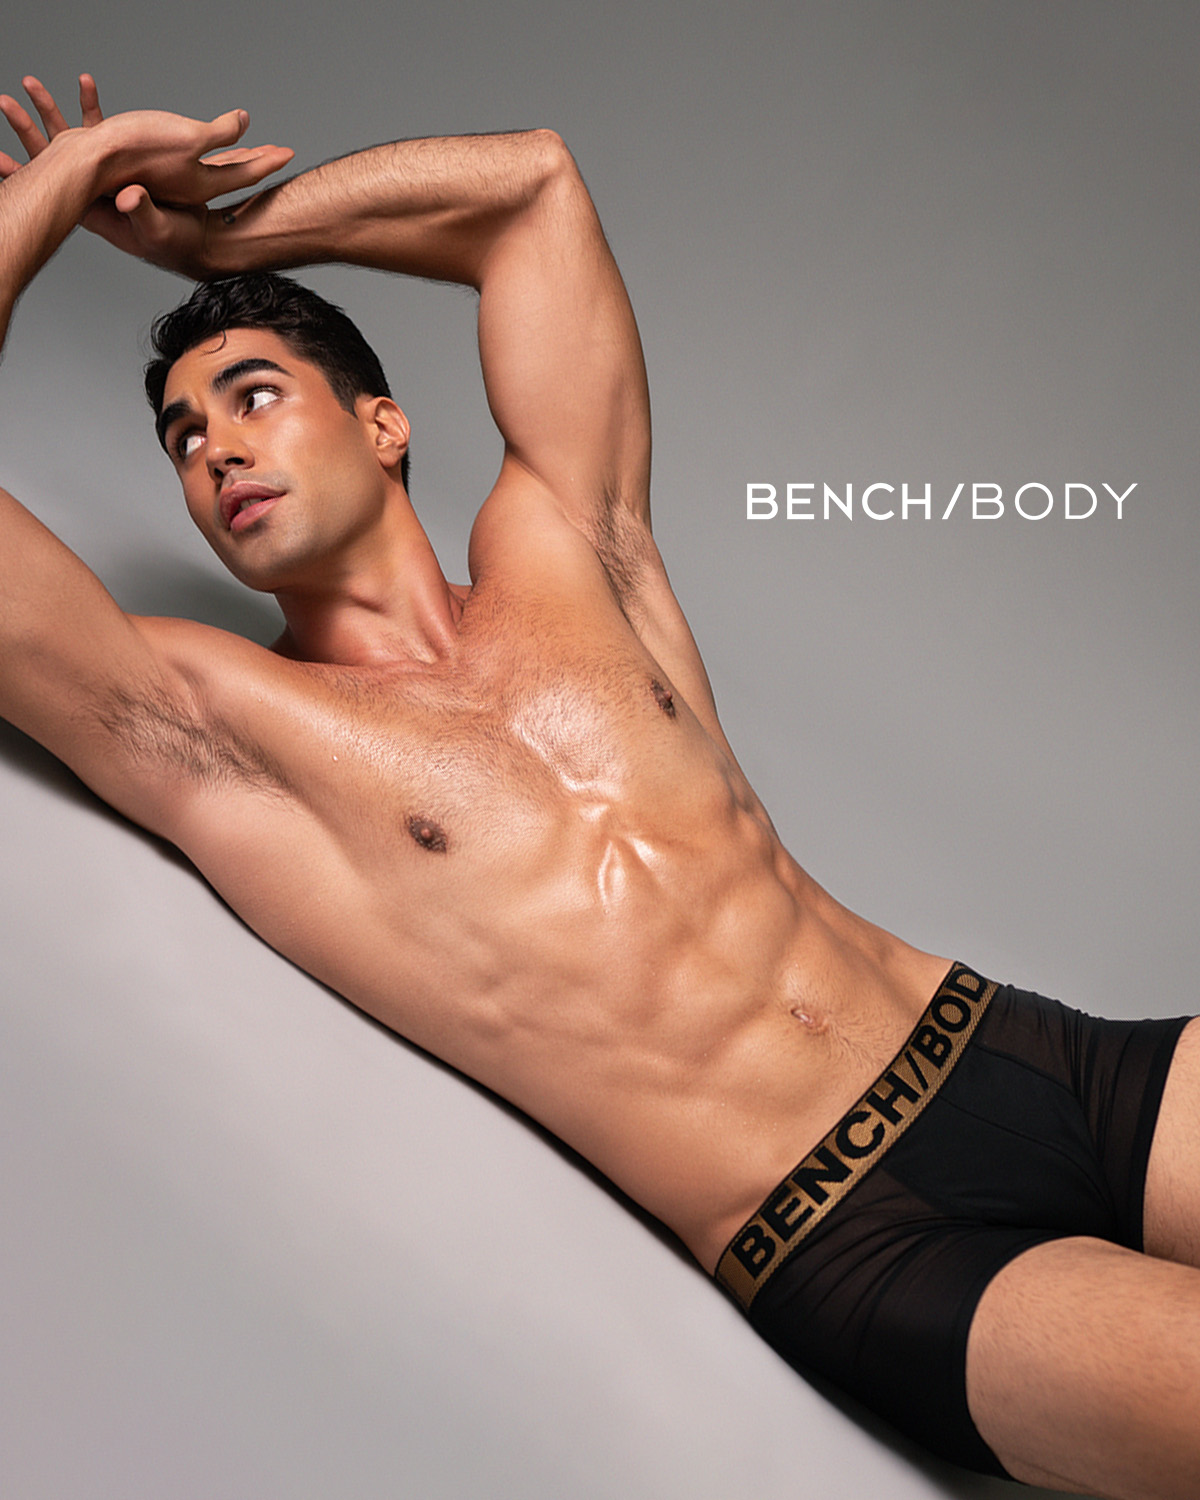 BENCH/ on X: Sculpted like David! Feel bold and powerful in